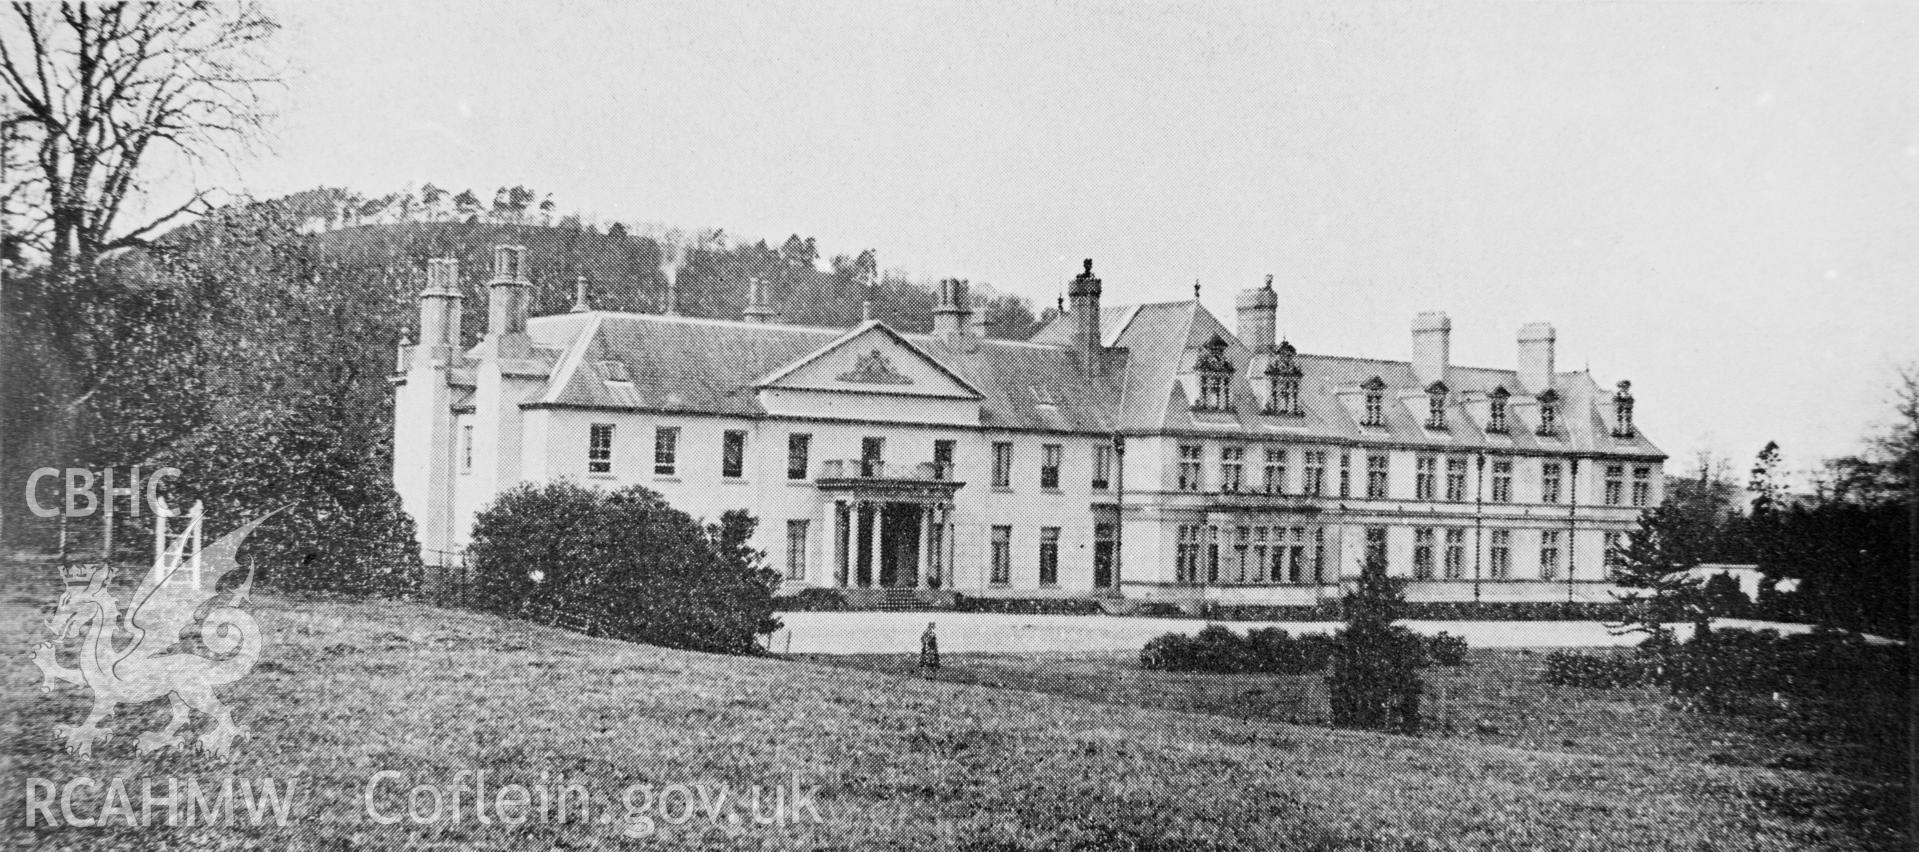 Copy of black and white image of Trawscoed Mansion, Trawscoed, copied from early photograph showing exterior, loaned by David Williams.